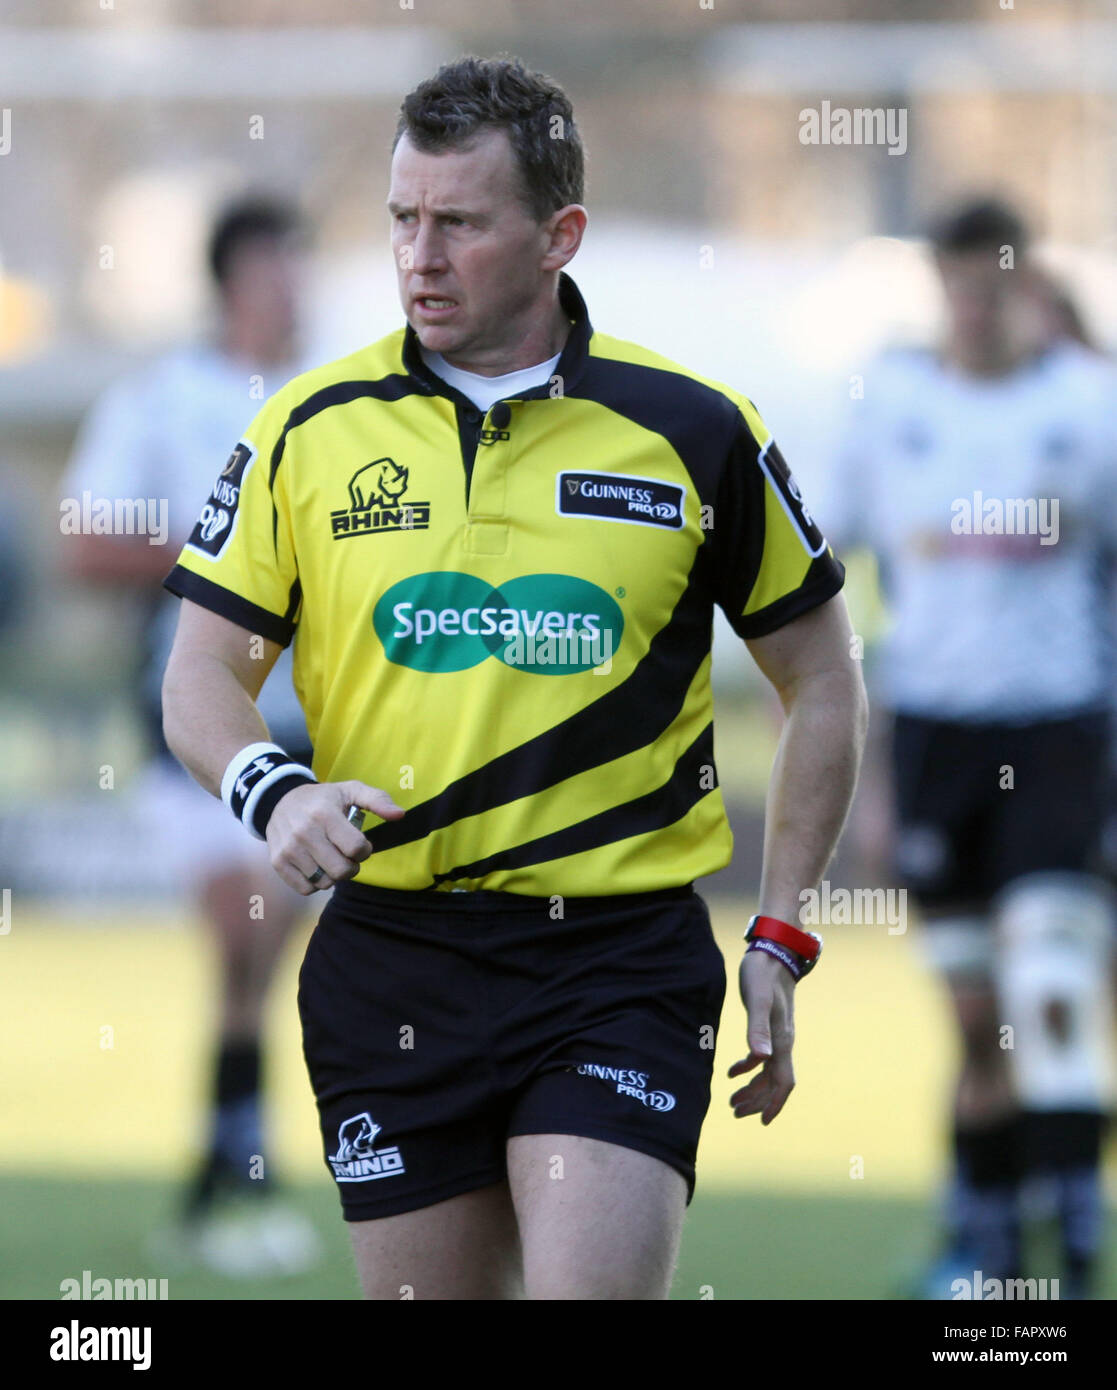 ITALY, Treviso: Referee Nigel Owens looks during Rugby Guinness Pro12 match  between Benetton Treviso and Zebre Rugby on 3rd January, 2016 in Treviso Stock Photo